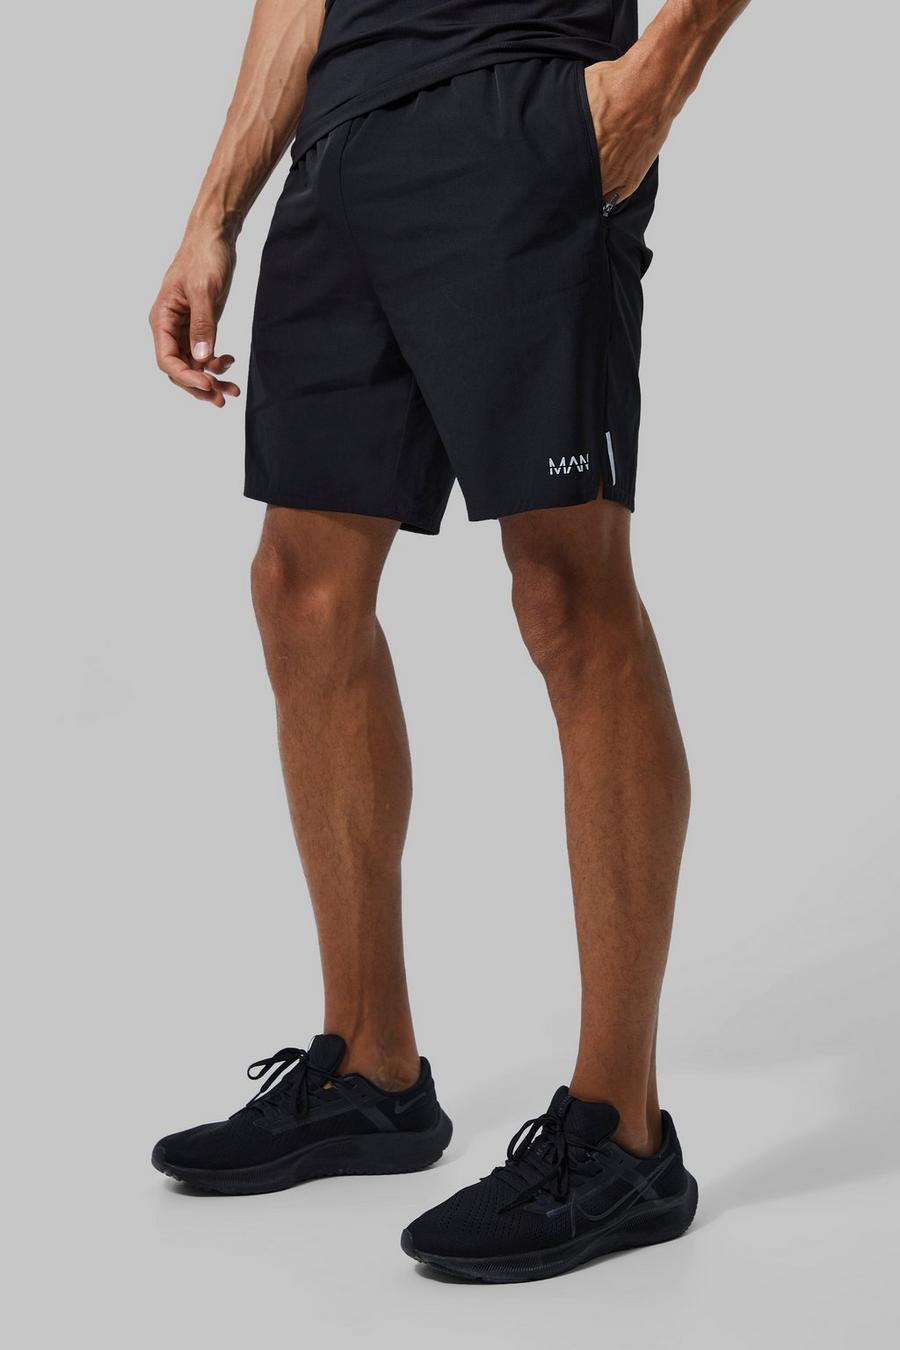 Black Tall Man Active Lightweight Performance Shorts image number 1